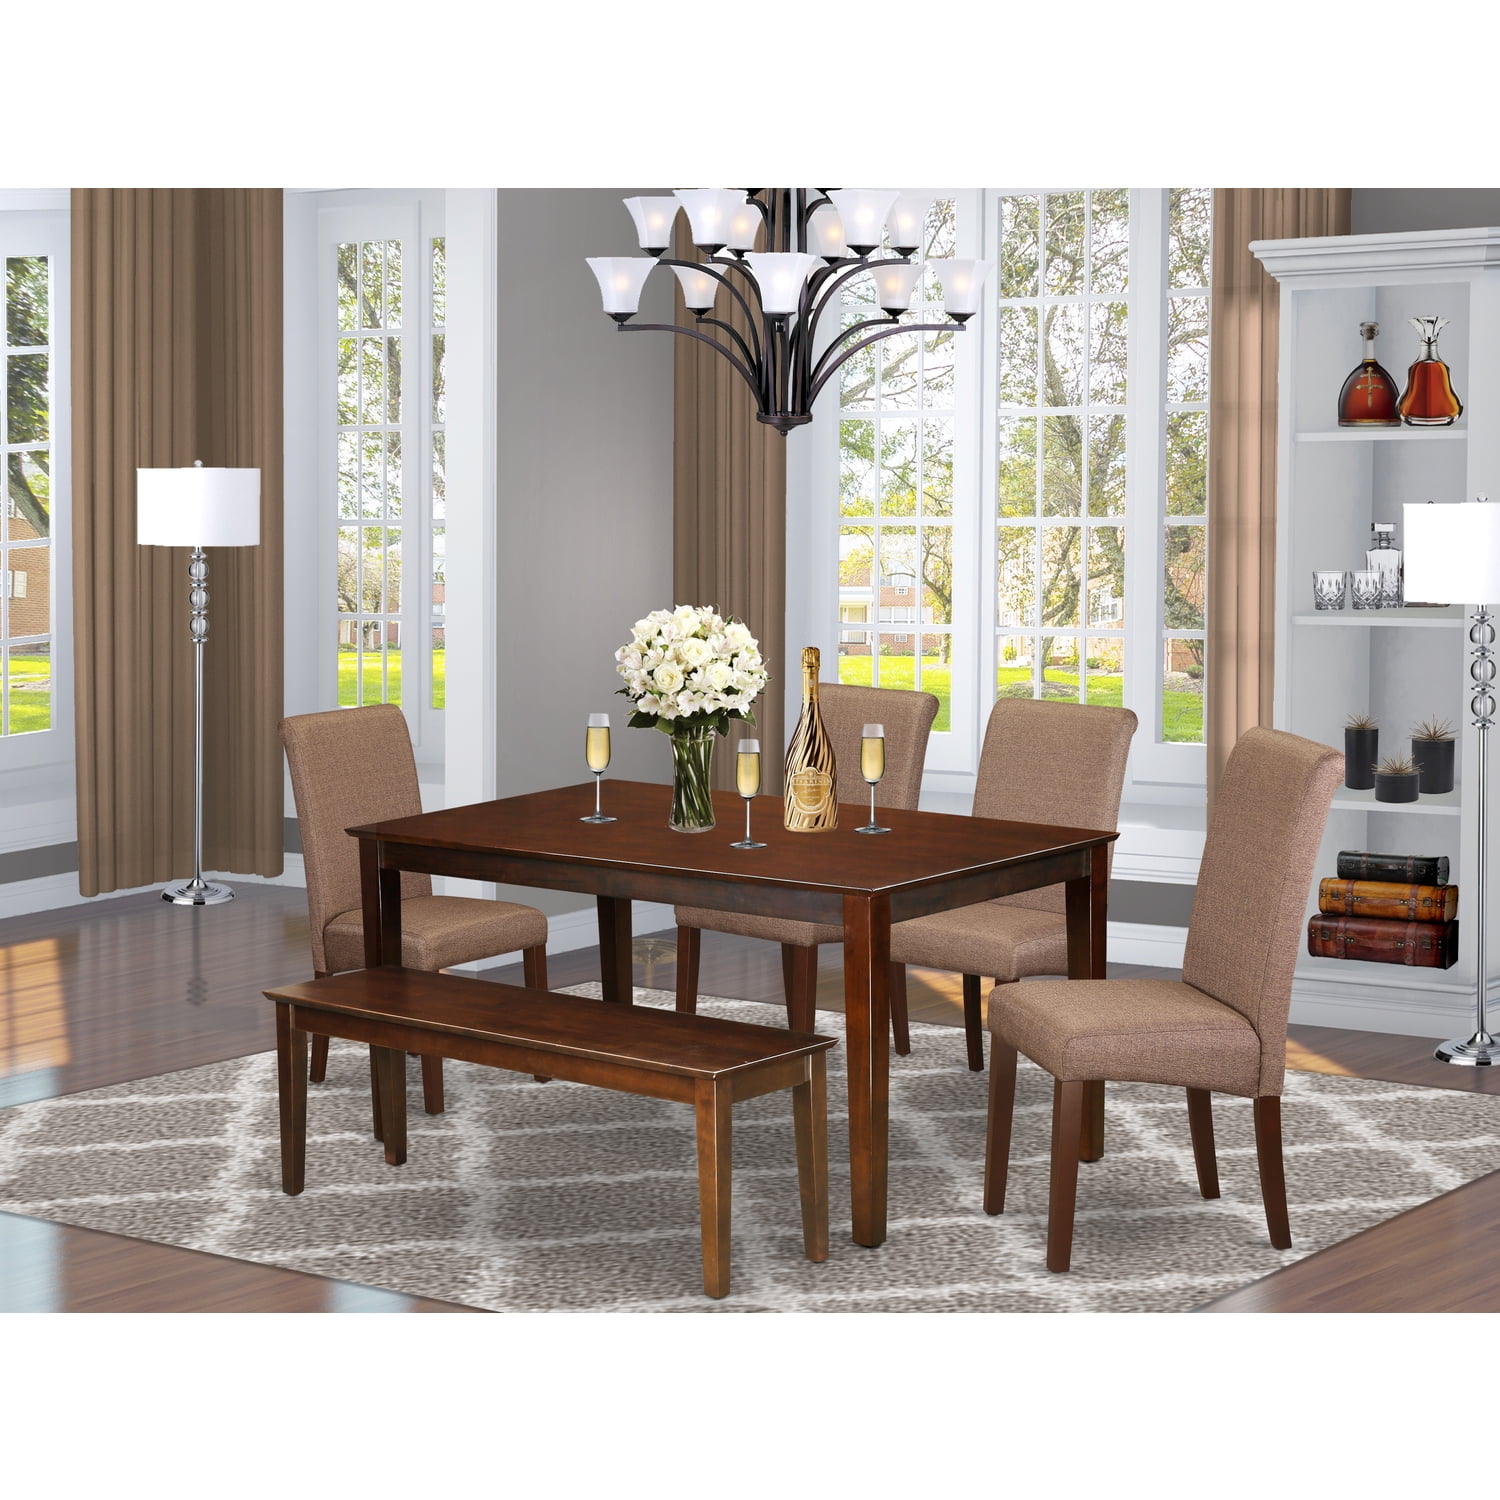 East West Furniture CABA6-MAH-18 6Pc Kitchen table with linen brown ...